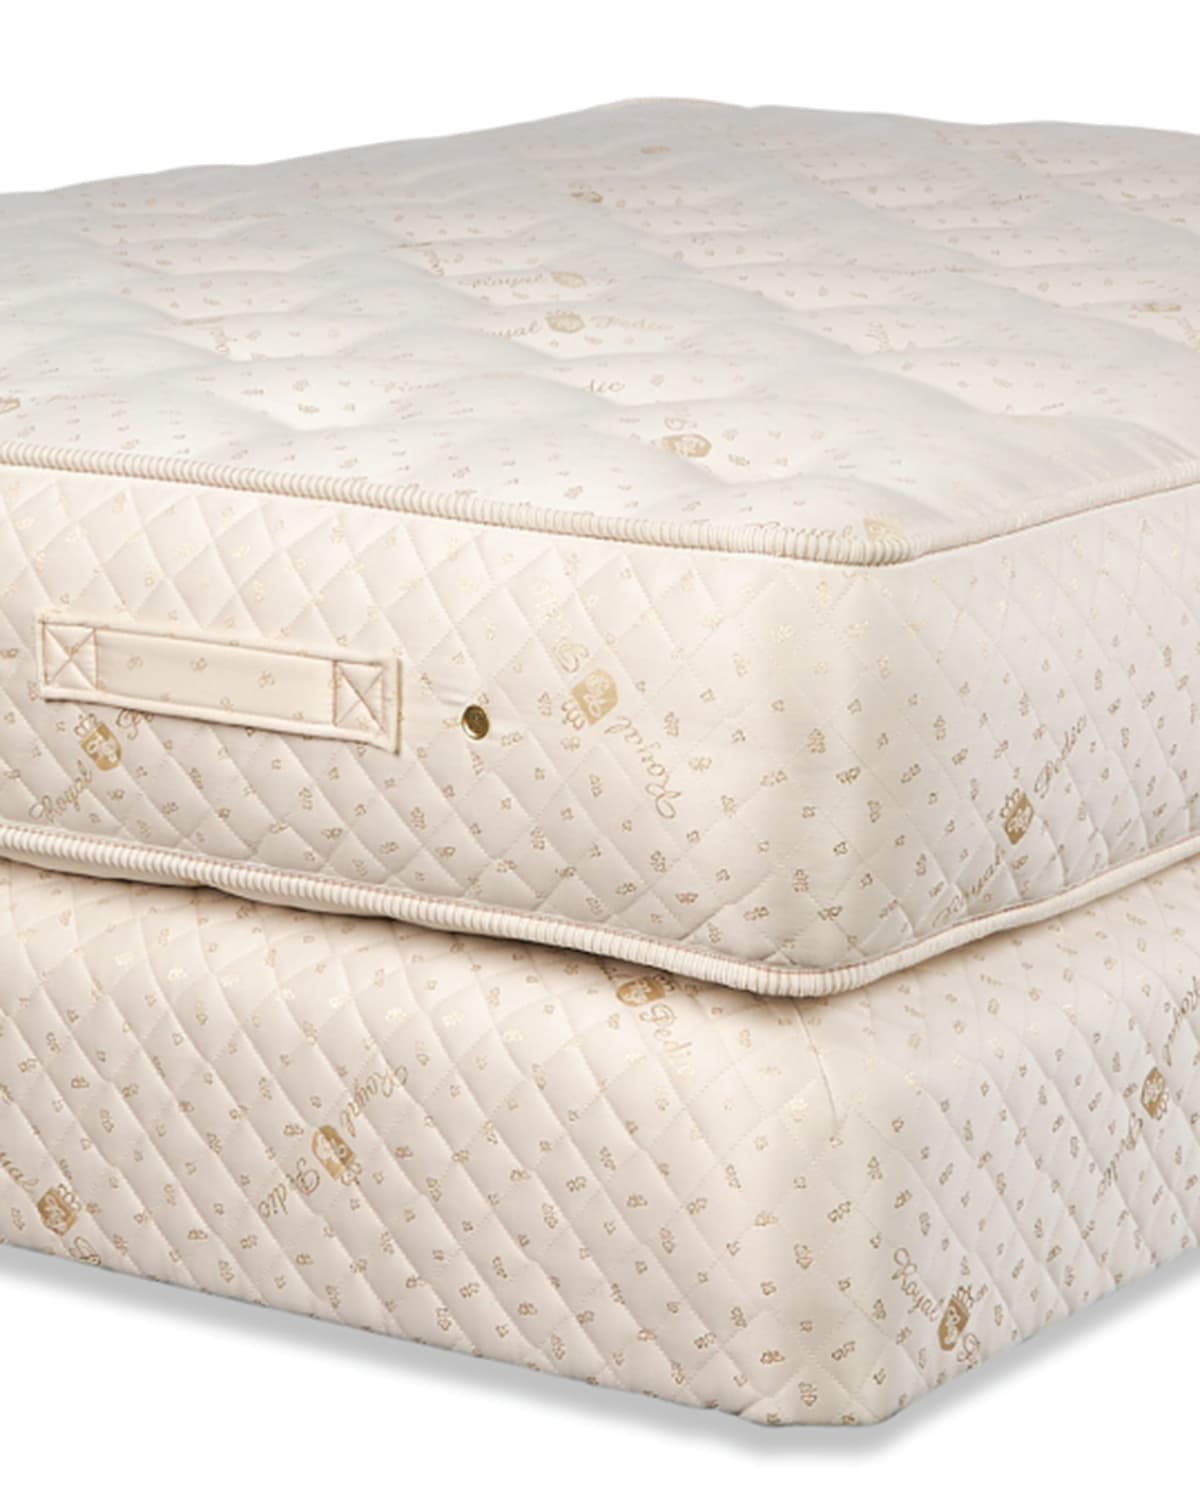 Royal-pedic Dream Spring Ultimate Firm Twin Xl Mattress Set In Gold